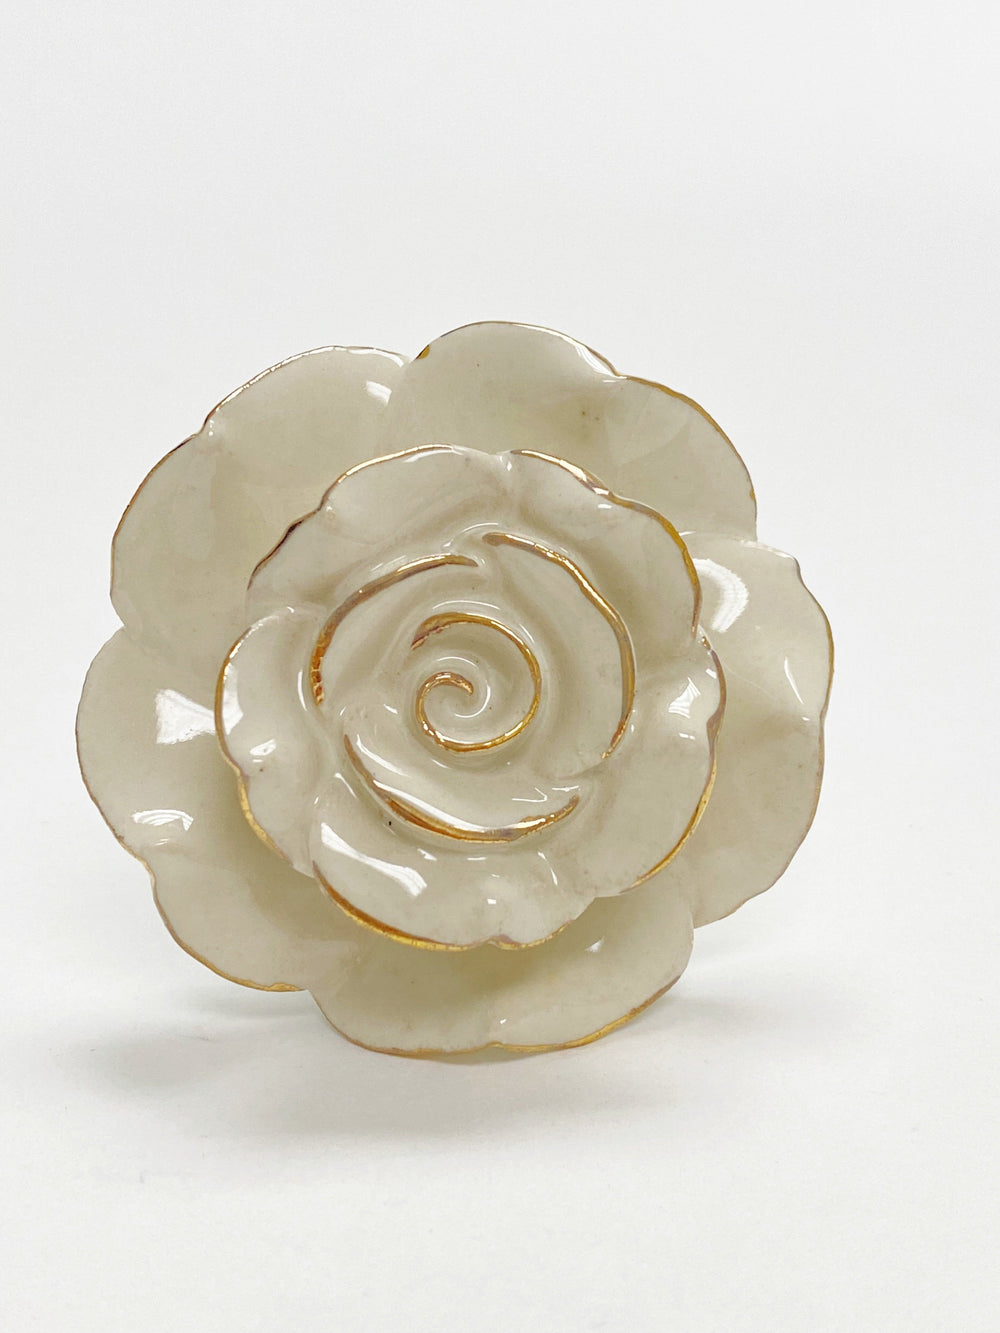 Ceramic Off-White and Golden Lines "Rosie" Cabinet Knob - Purdy Hardware - 